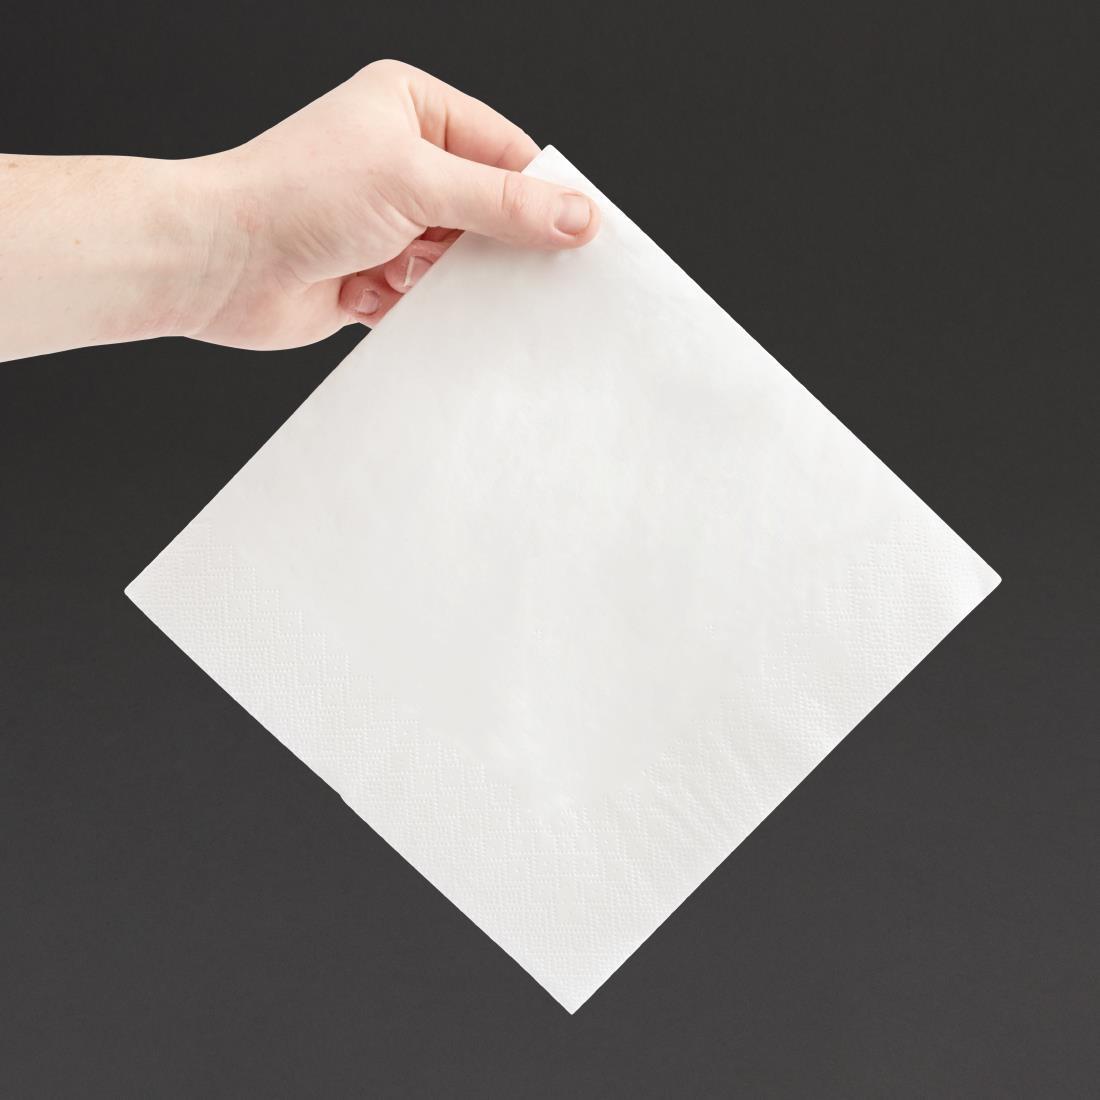 Fiesta Recyclable Dinner Napkin White 40x40cm 3ply 1/4 Fold (Pack of 1000) - FE251  - 4